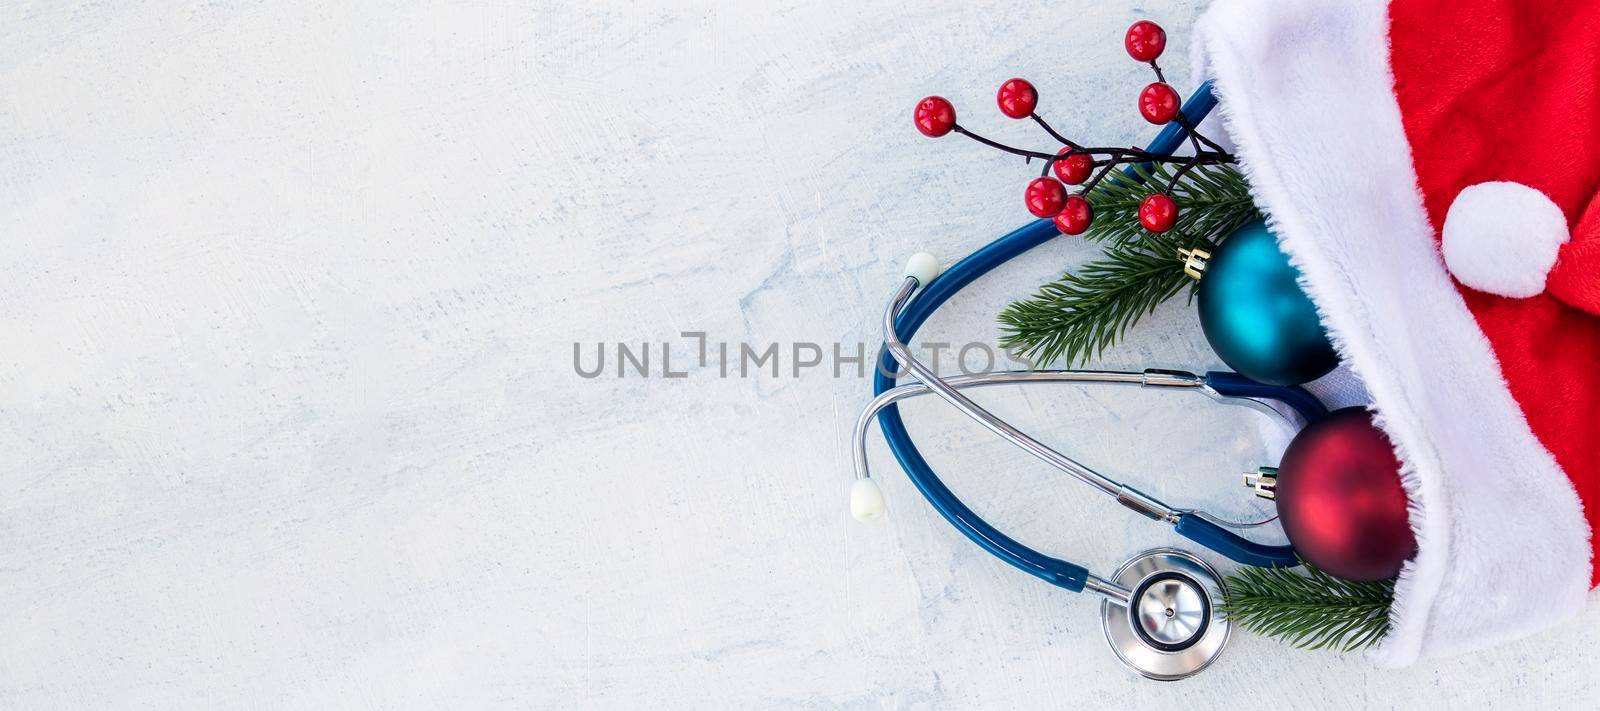 banner with Stethoscope with branches of Christmas tree and Christmas balls in Santa Claus hat. All on white concrete table. Concept Merry Christmas and Happy New year or Healthy New Year. Copy space